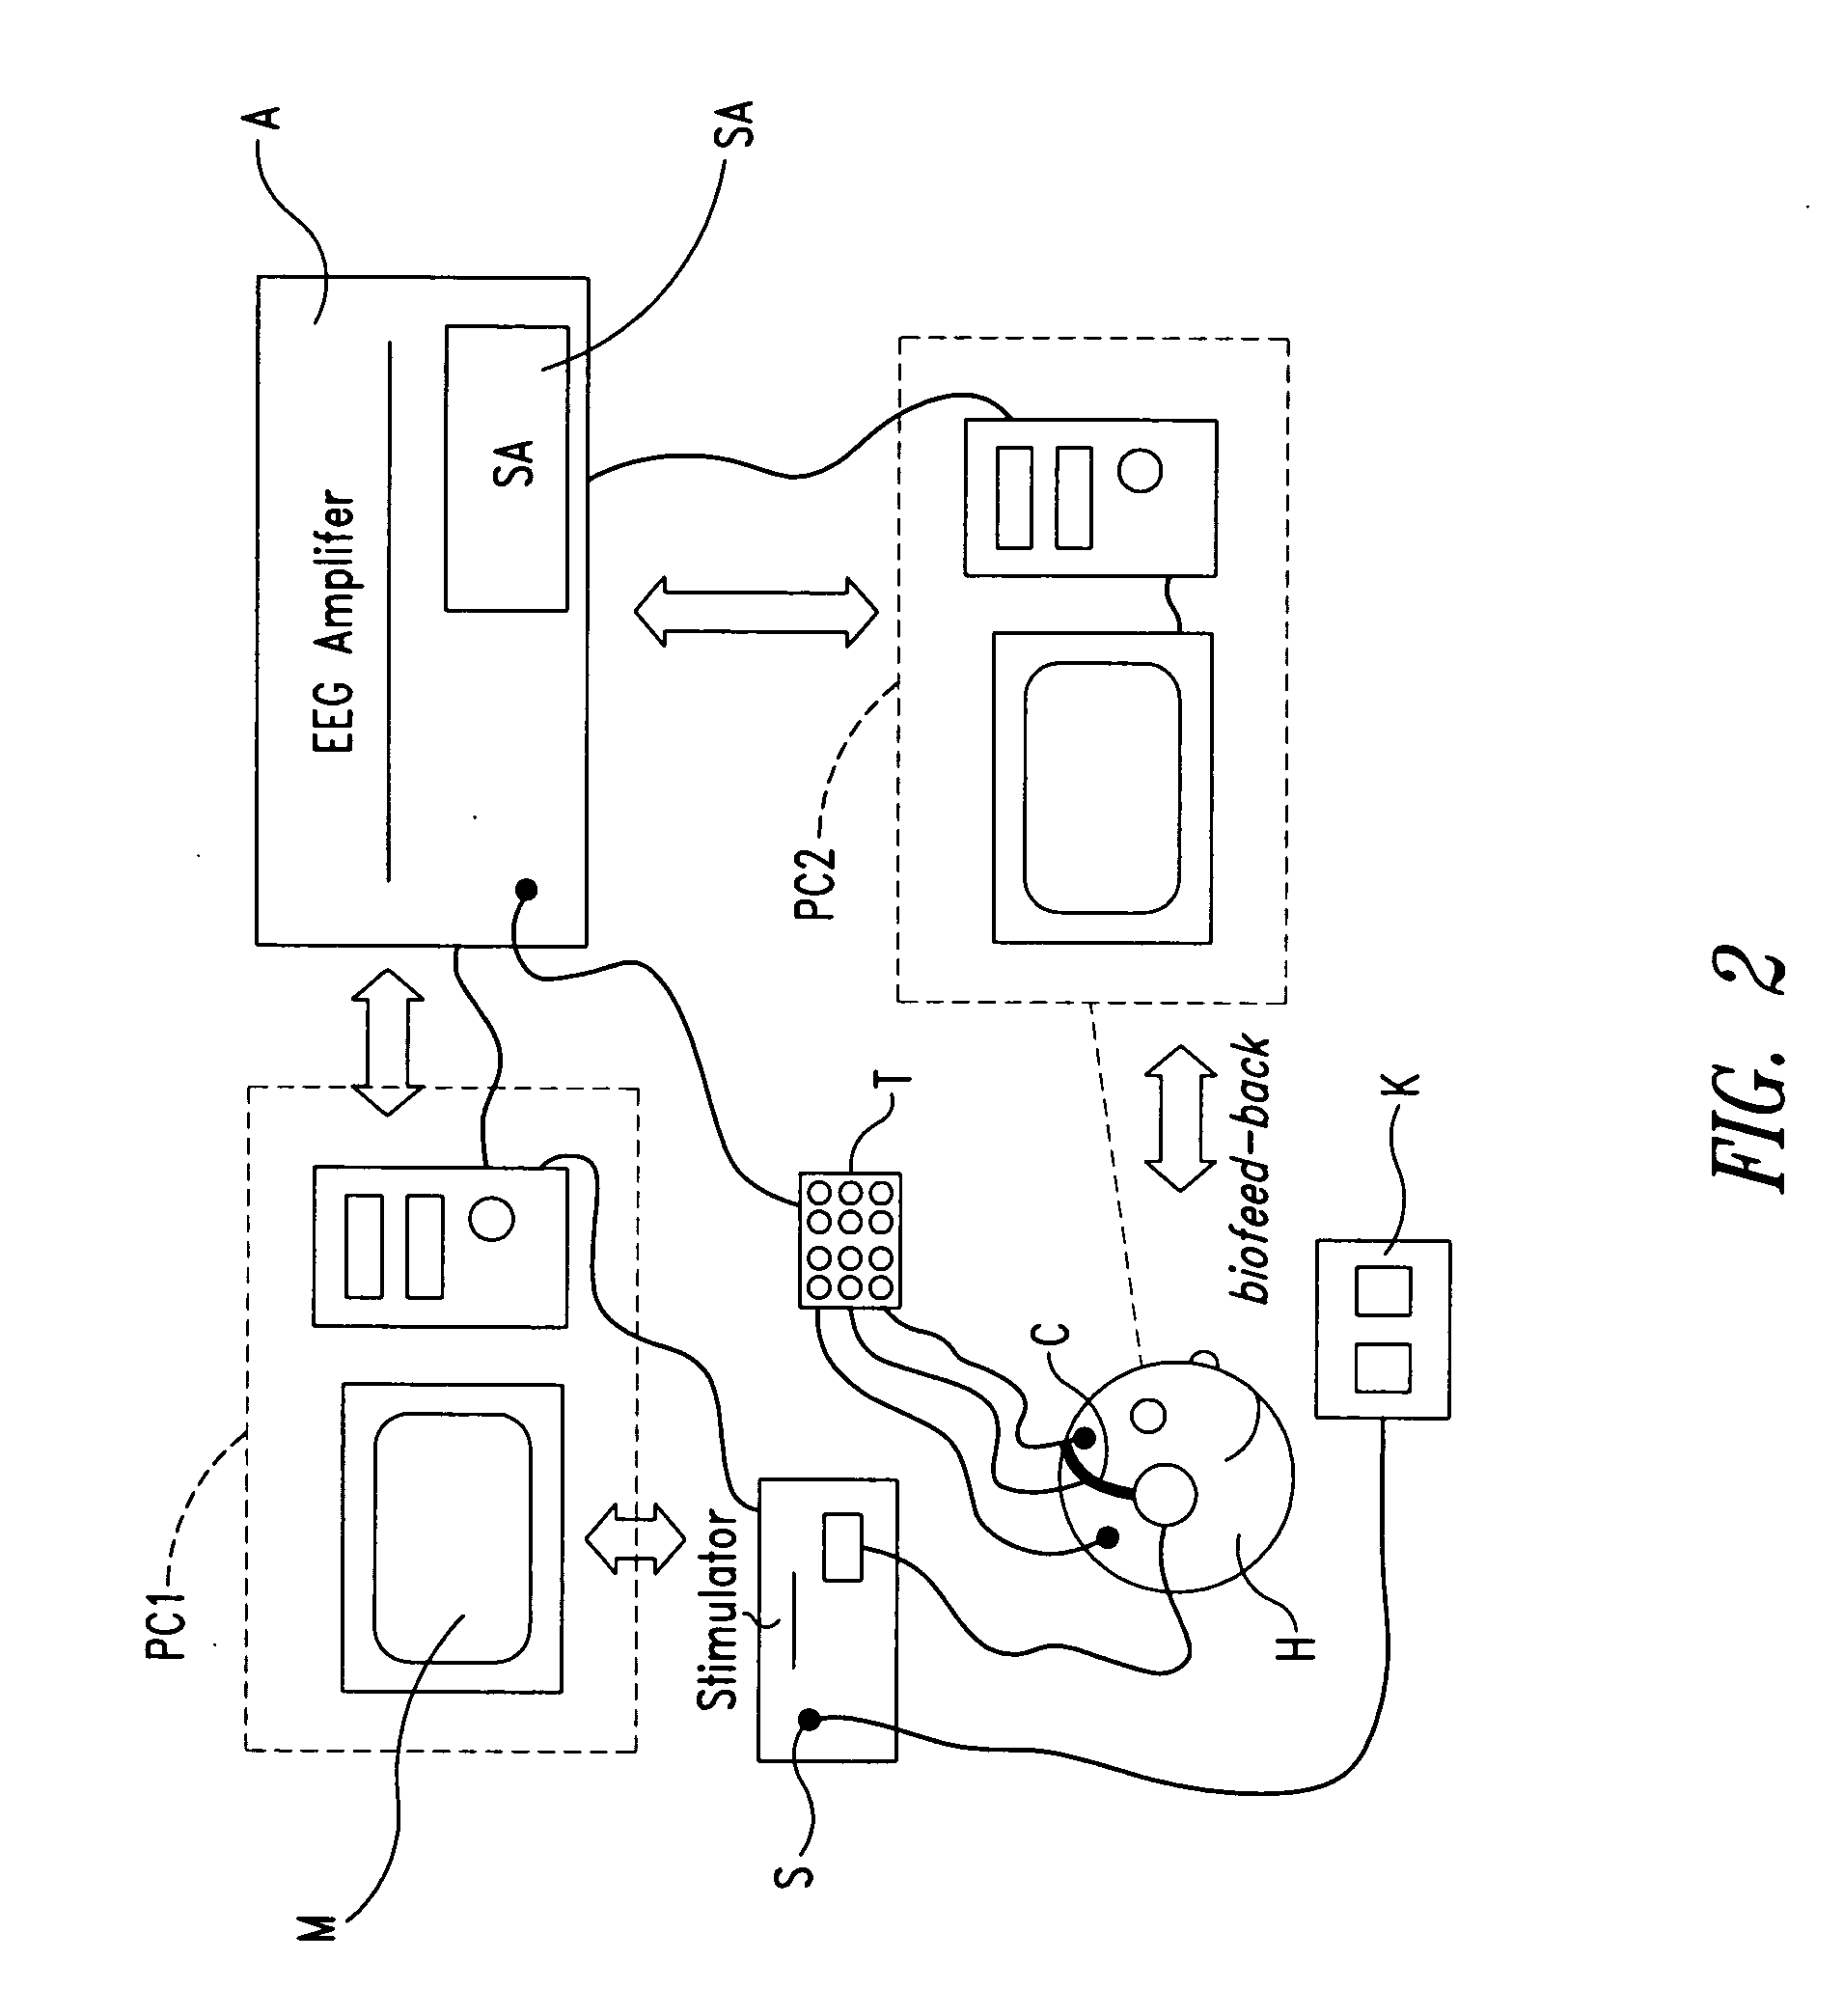 Man-machine interfaces system and method, for instance applications in the area of rehabilitation